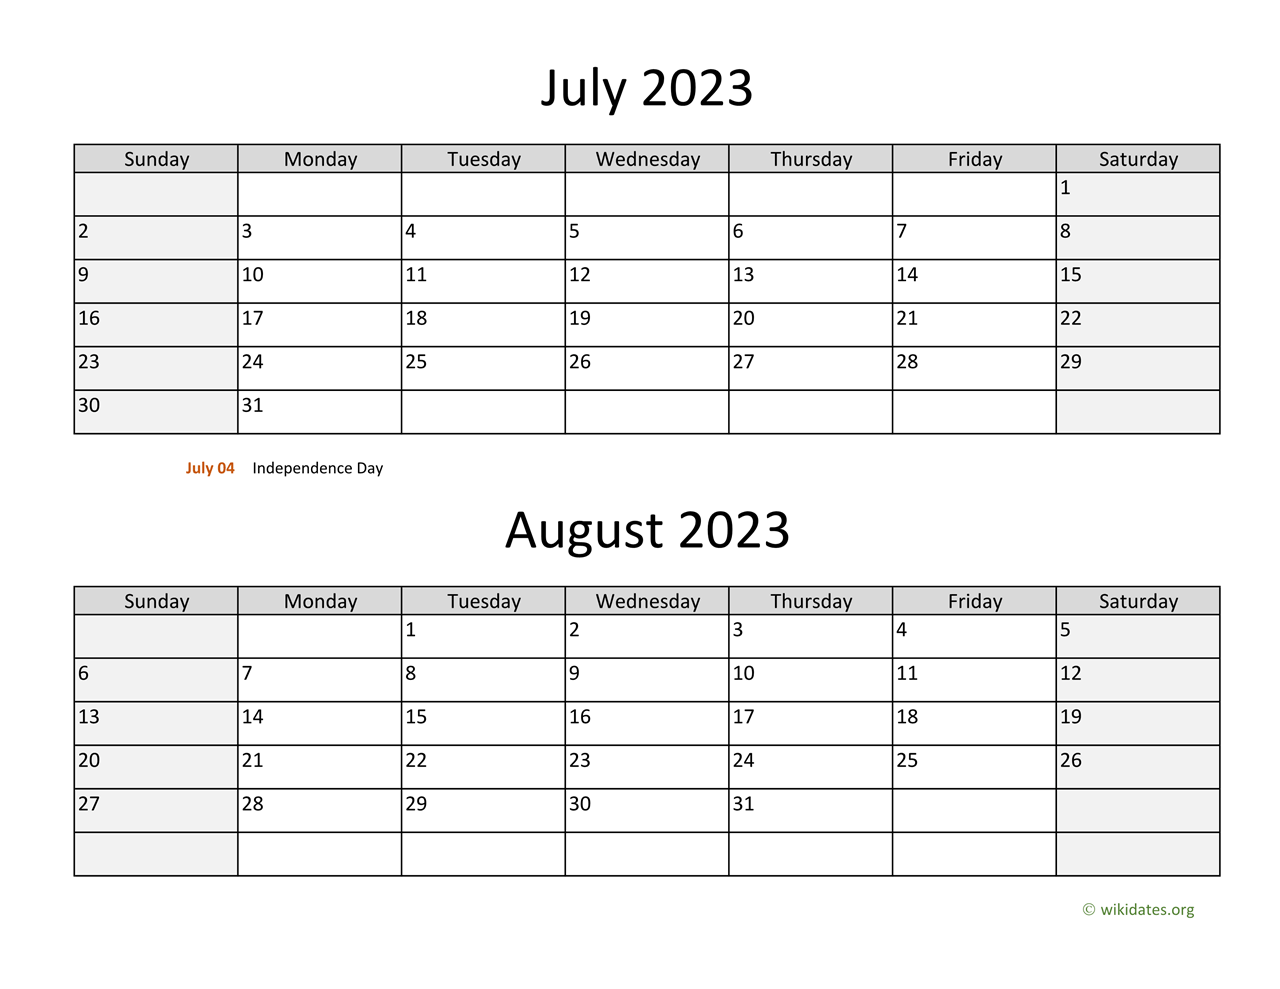 July and August 2023 Calendar | WikiDates.org